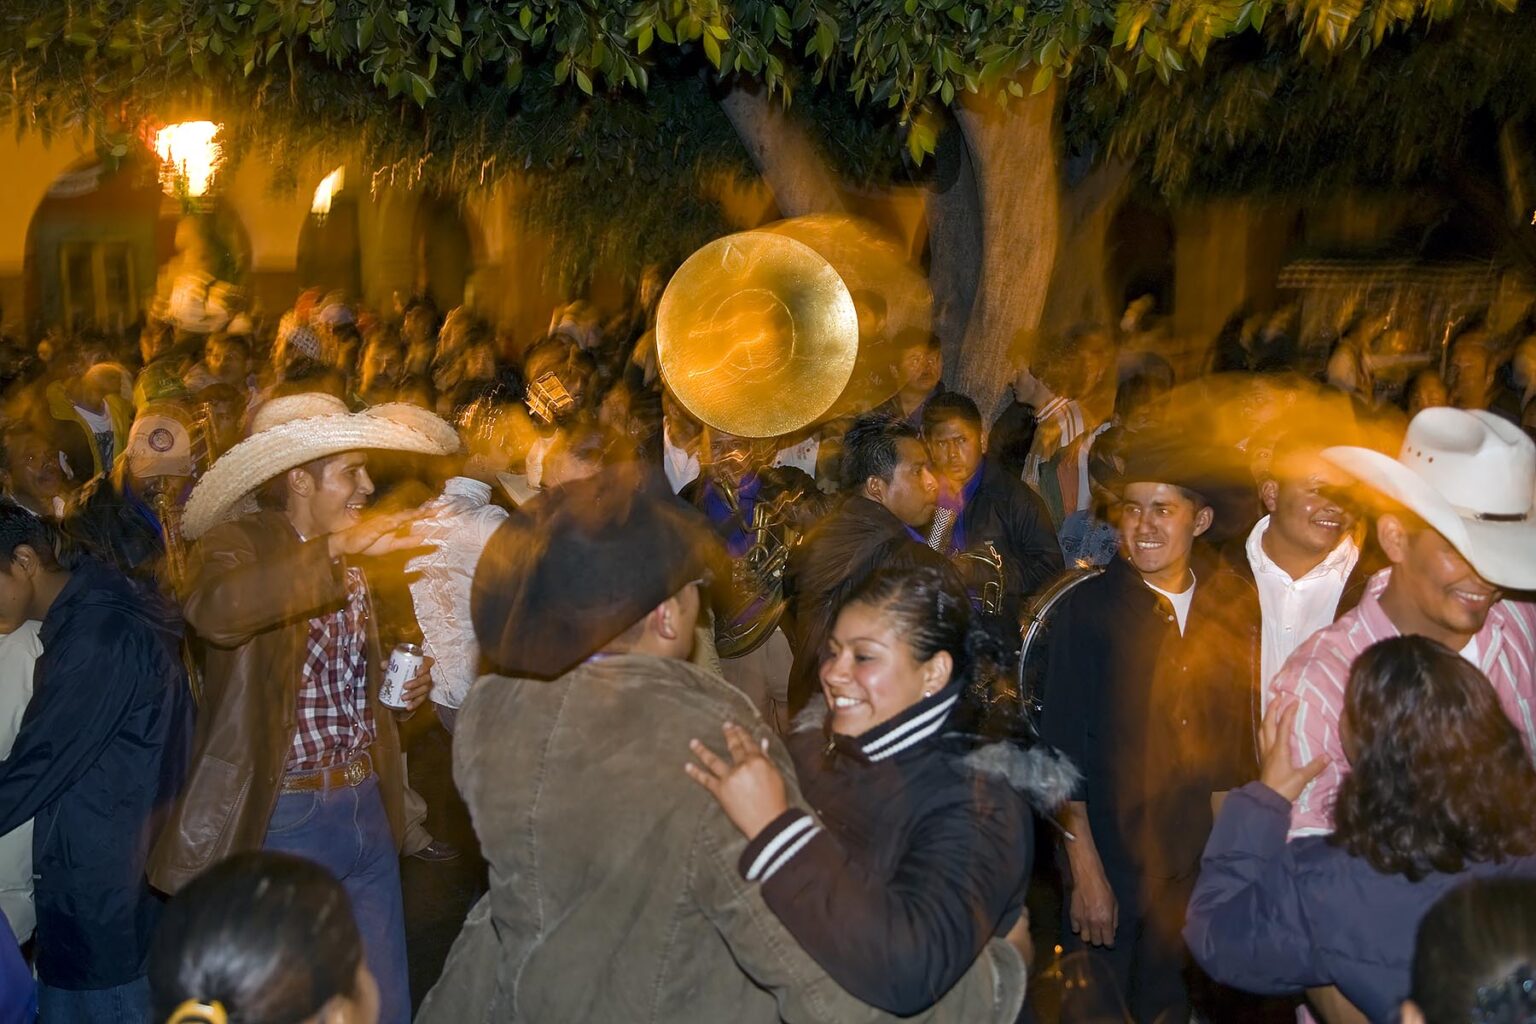 MEXICAN COUPLES dance in the Central Plaza or Jardin during the Festival of San Miguel Archangel - SAN MIGUEL DE ALLENDE, MEXICO